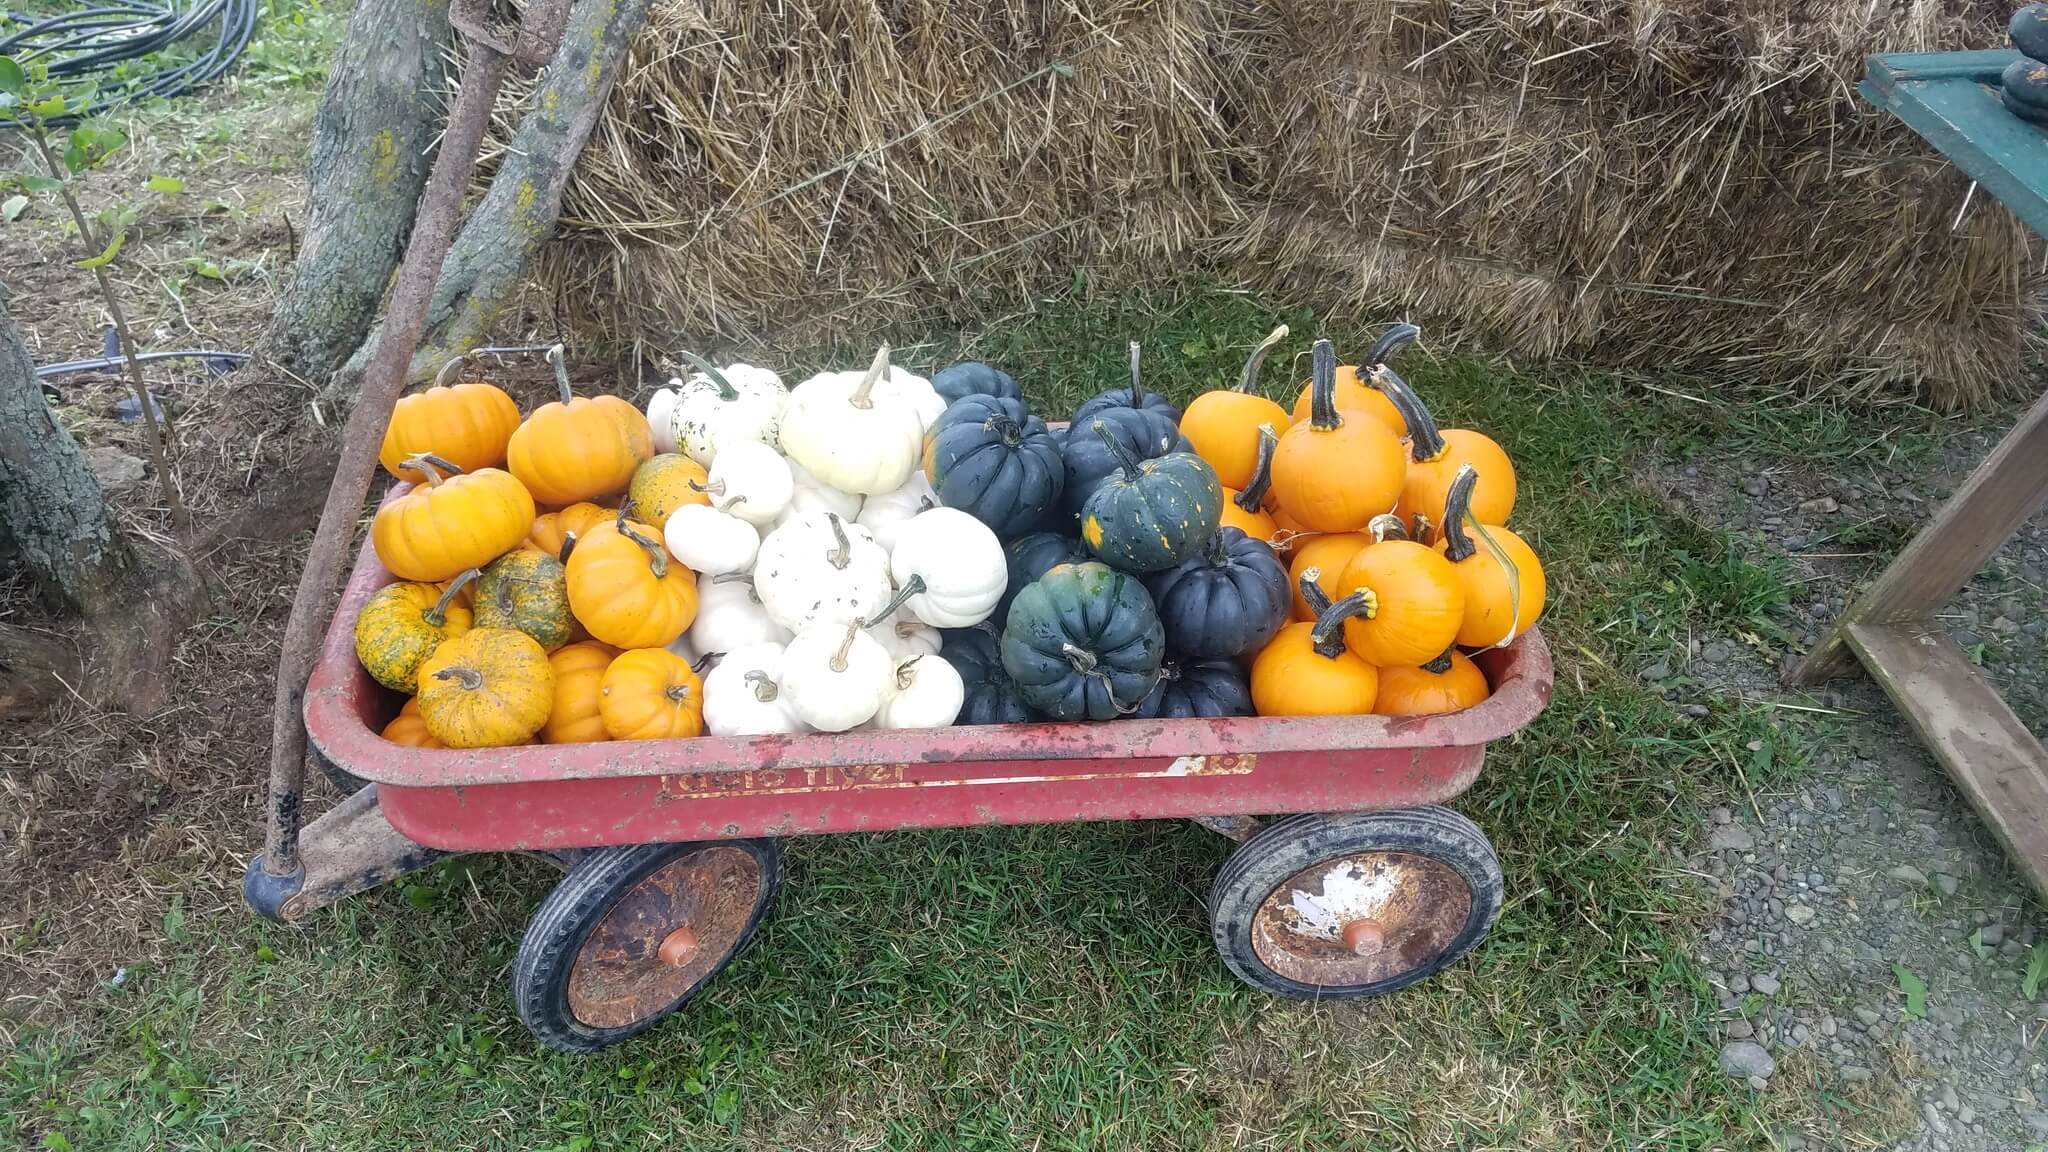 Red wagon full of small pumpkins